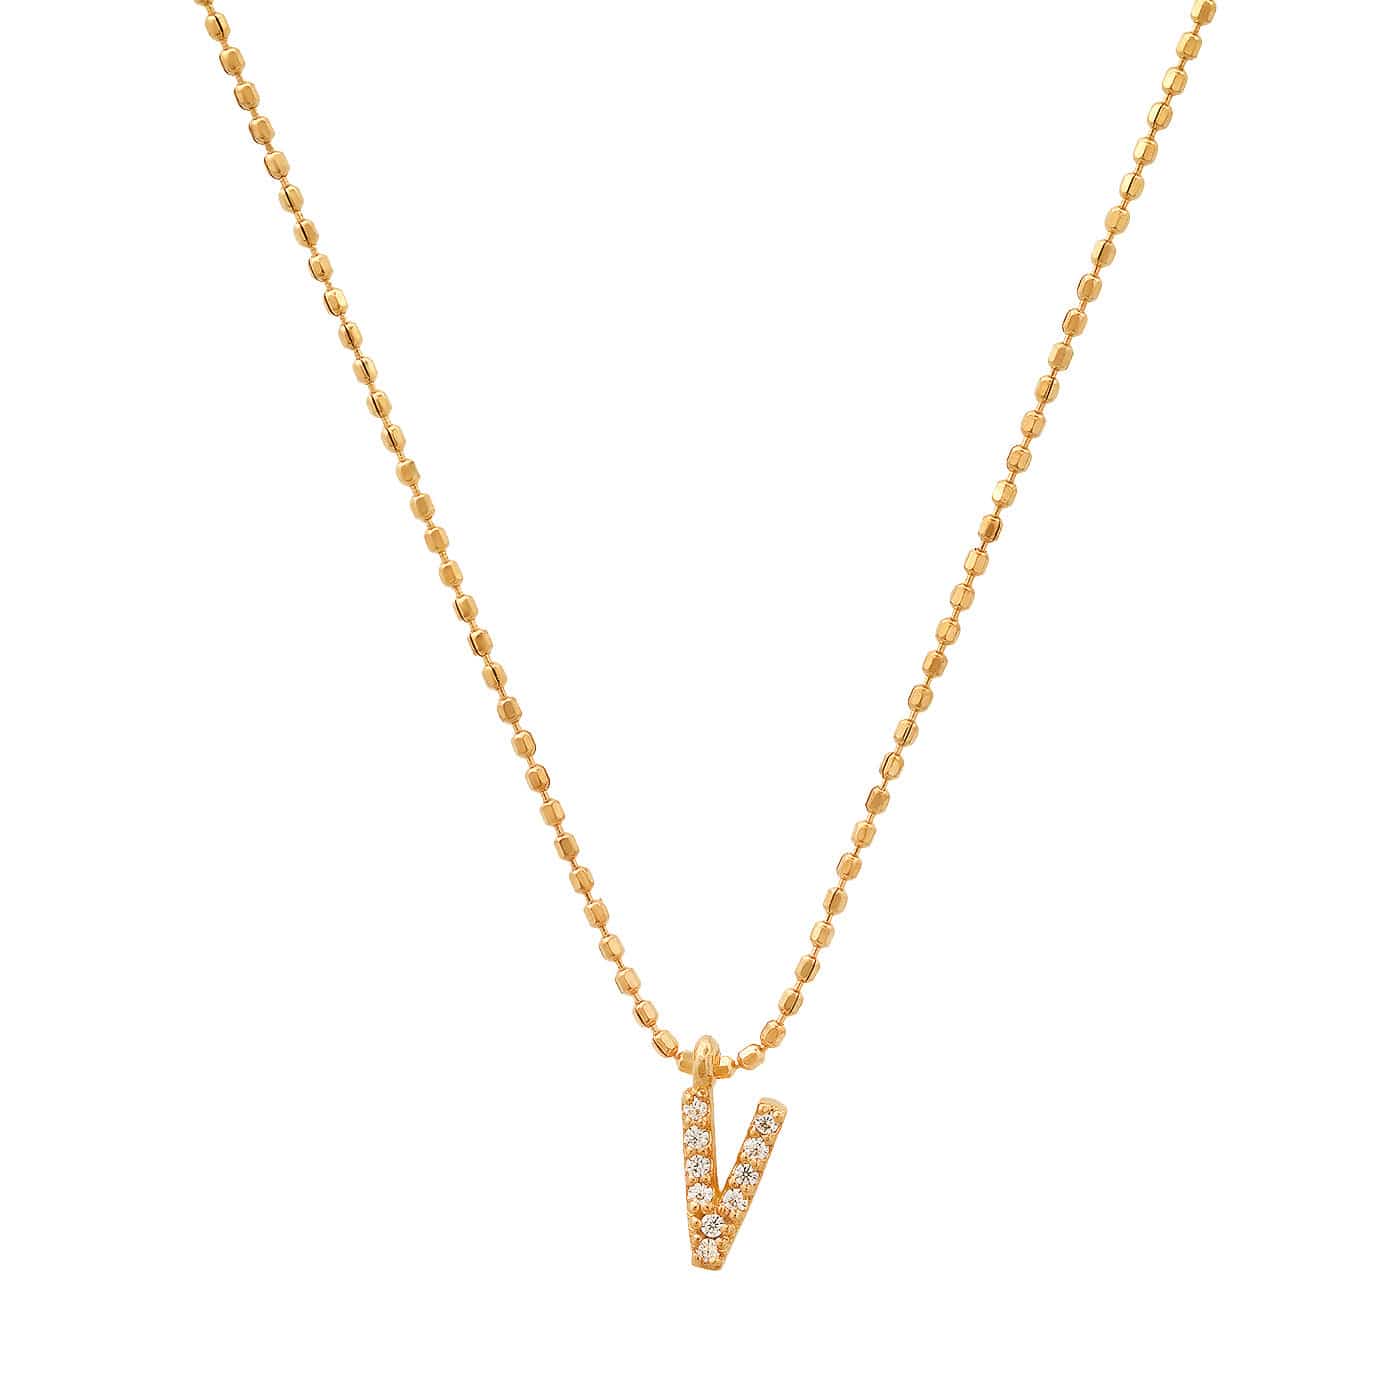 TAI JEWELRY Necklace V Pave Initial Ball Chain Necklace